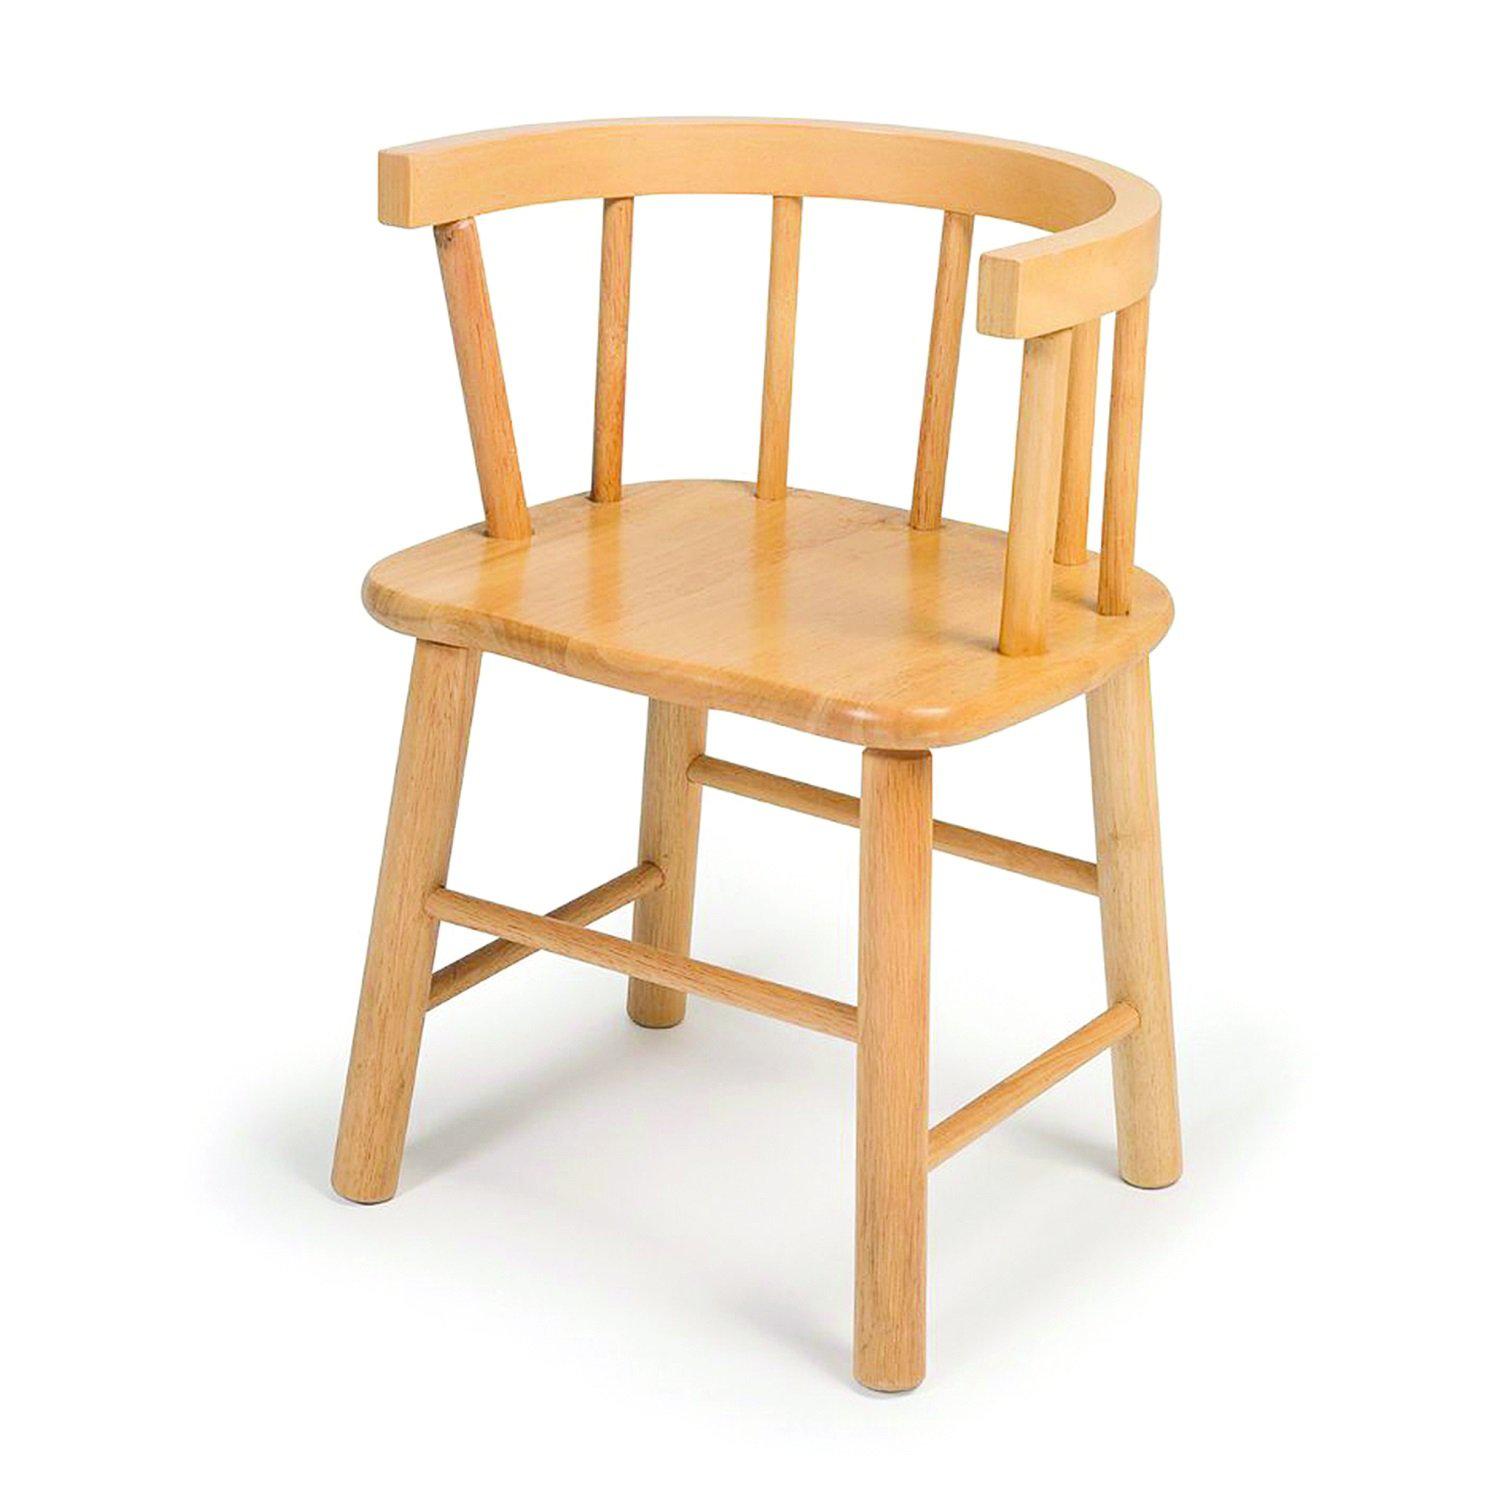 Bentwood Back Maple Chair, 12" Seat Height